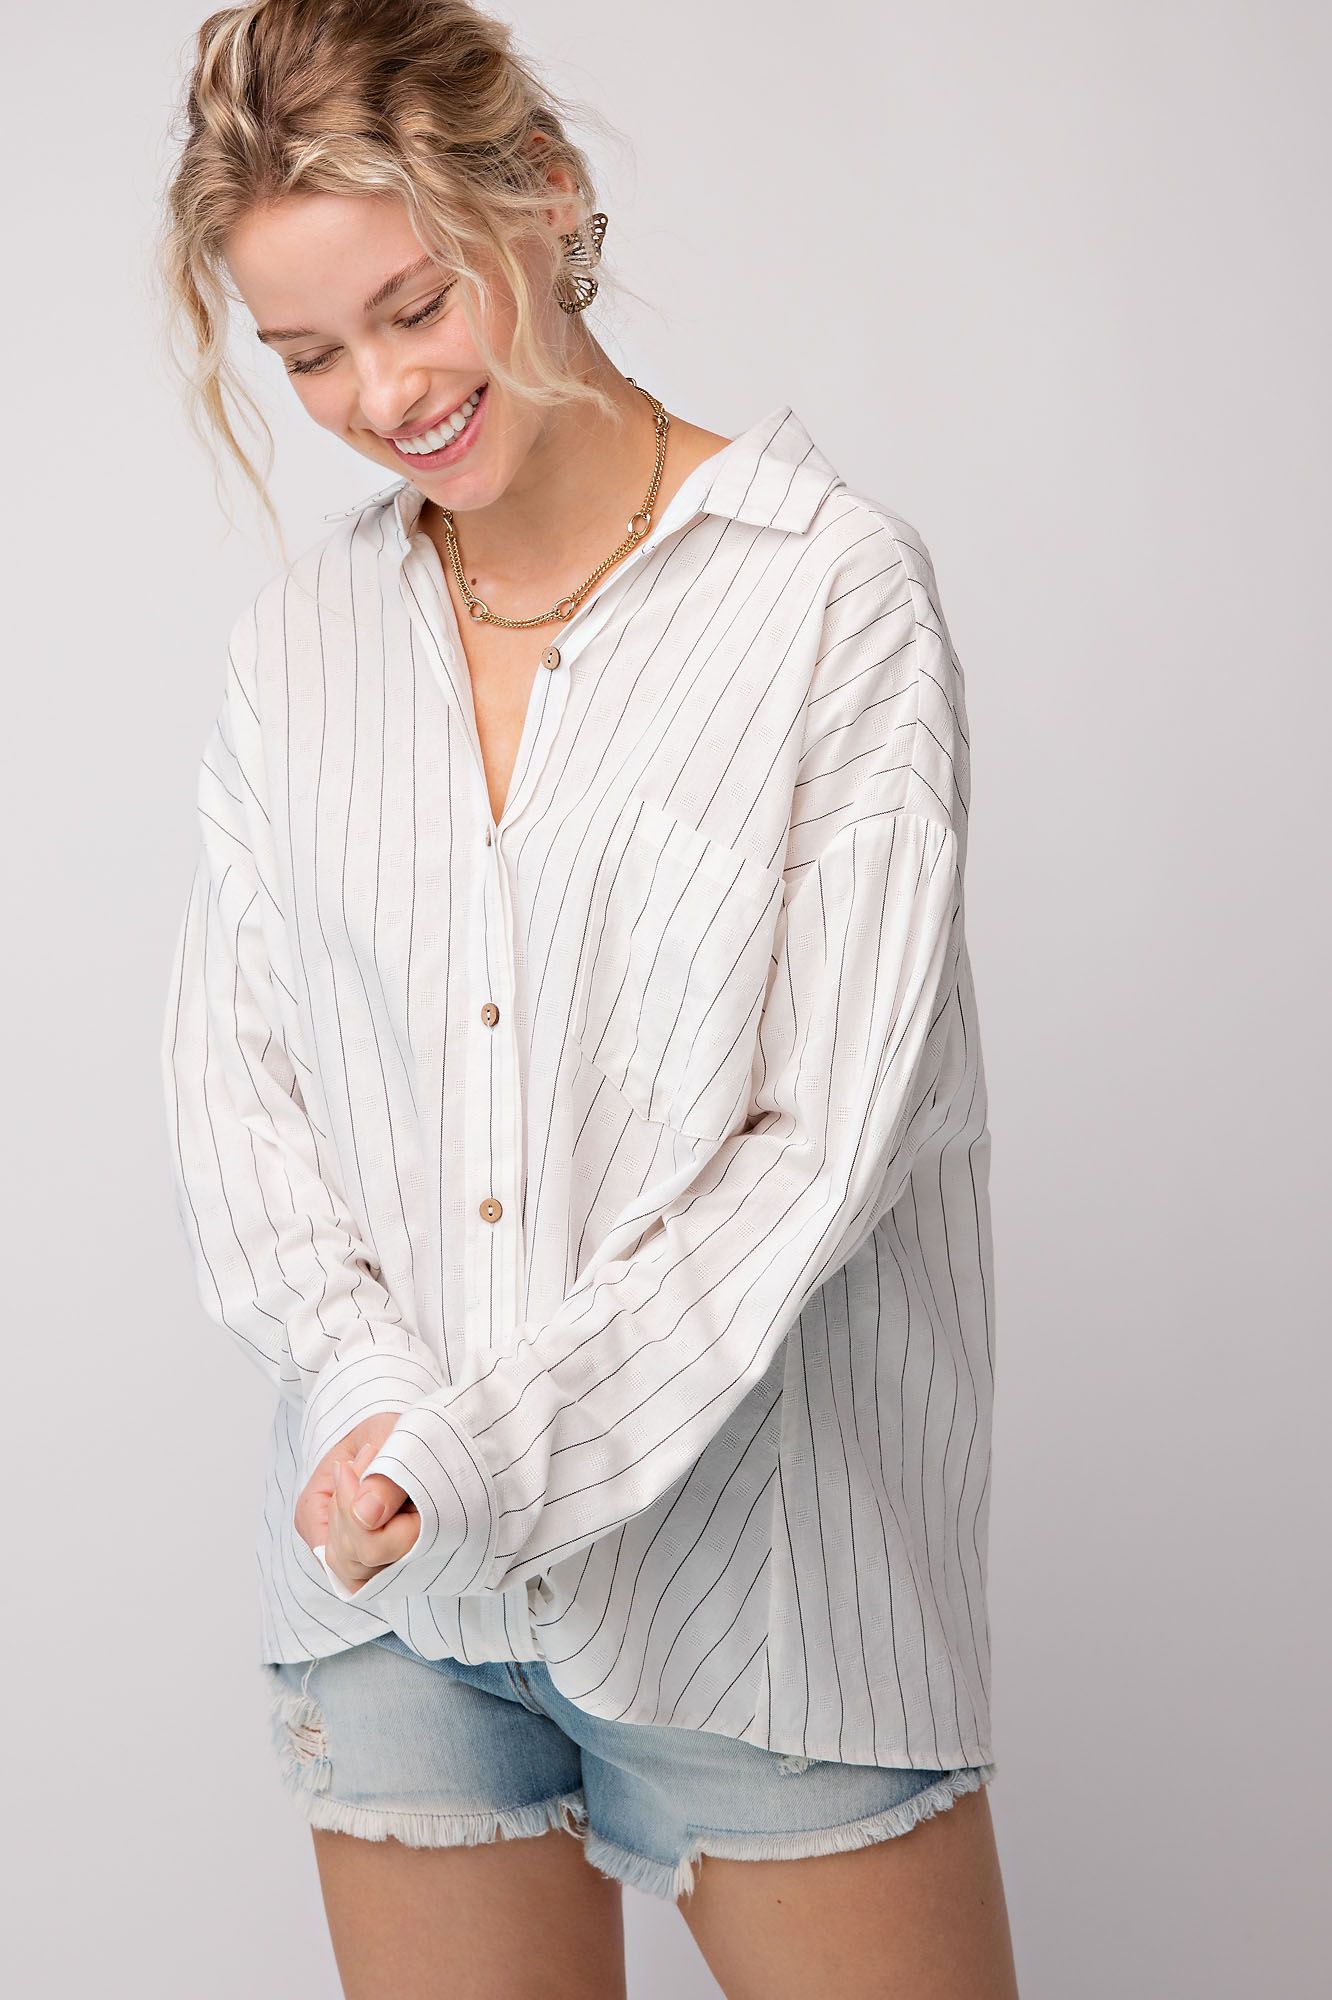 Easel Linen Pinstripe Collared Cuffed Sleeve Twisted Button Down Top